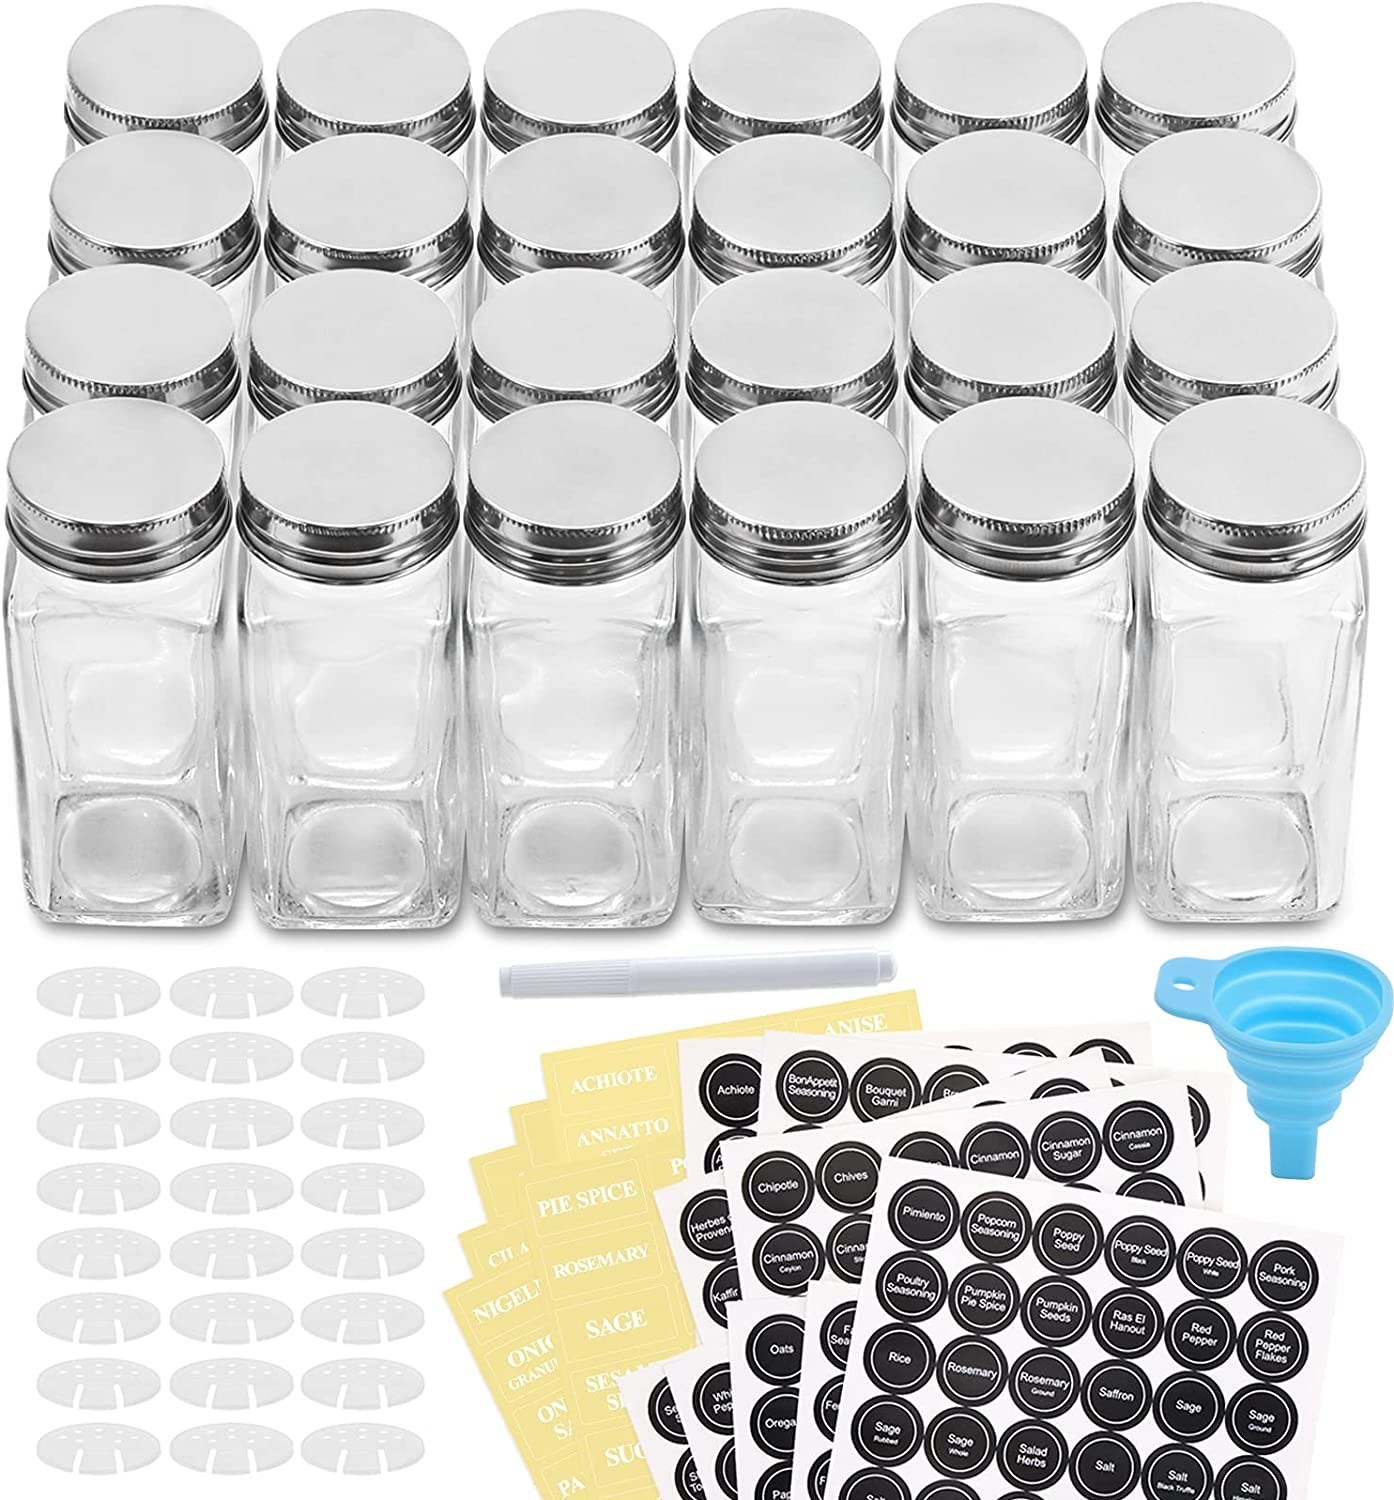 24 glass spice bottles with named stickers and a funnel